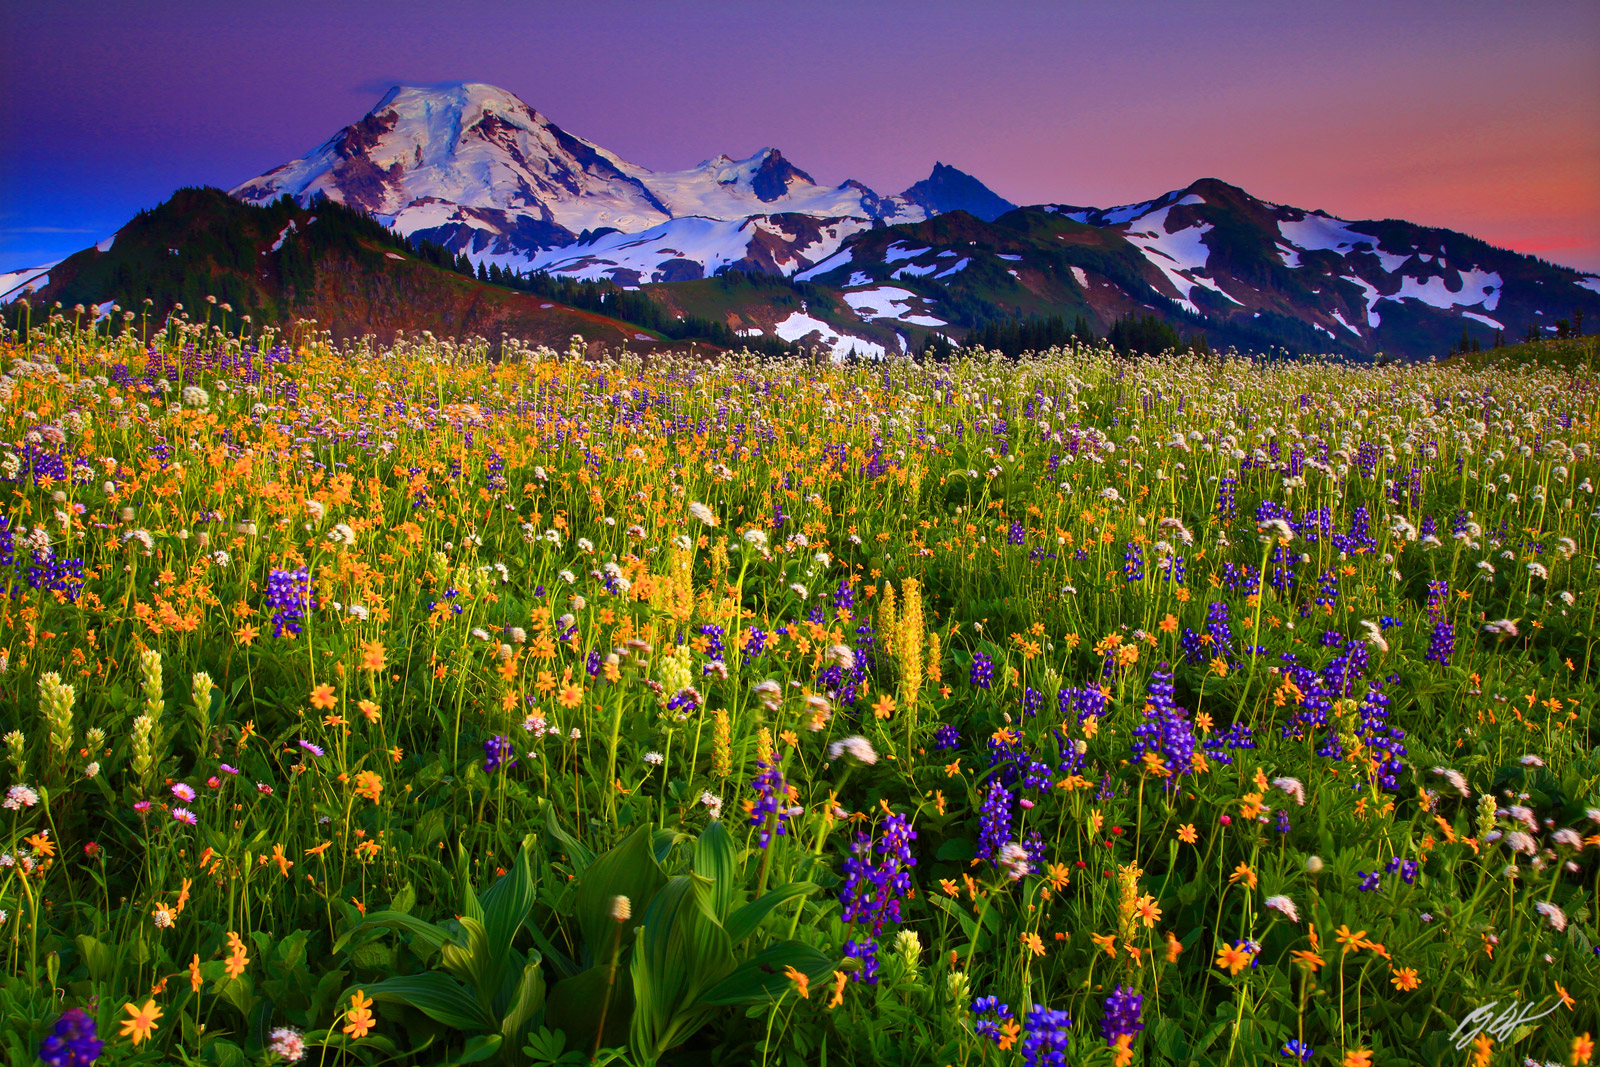 Sunset Alpenglow Wildflowers and Mt Baker from Skyline Divide in the Mt Baker Wilderness, Washington